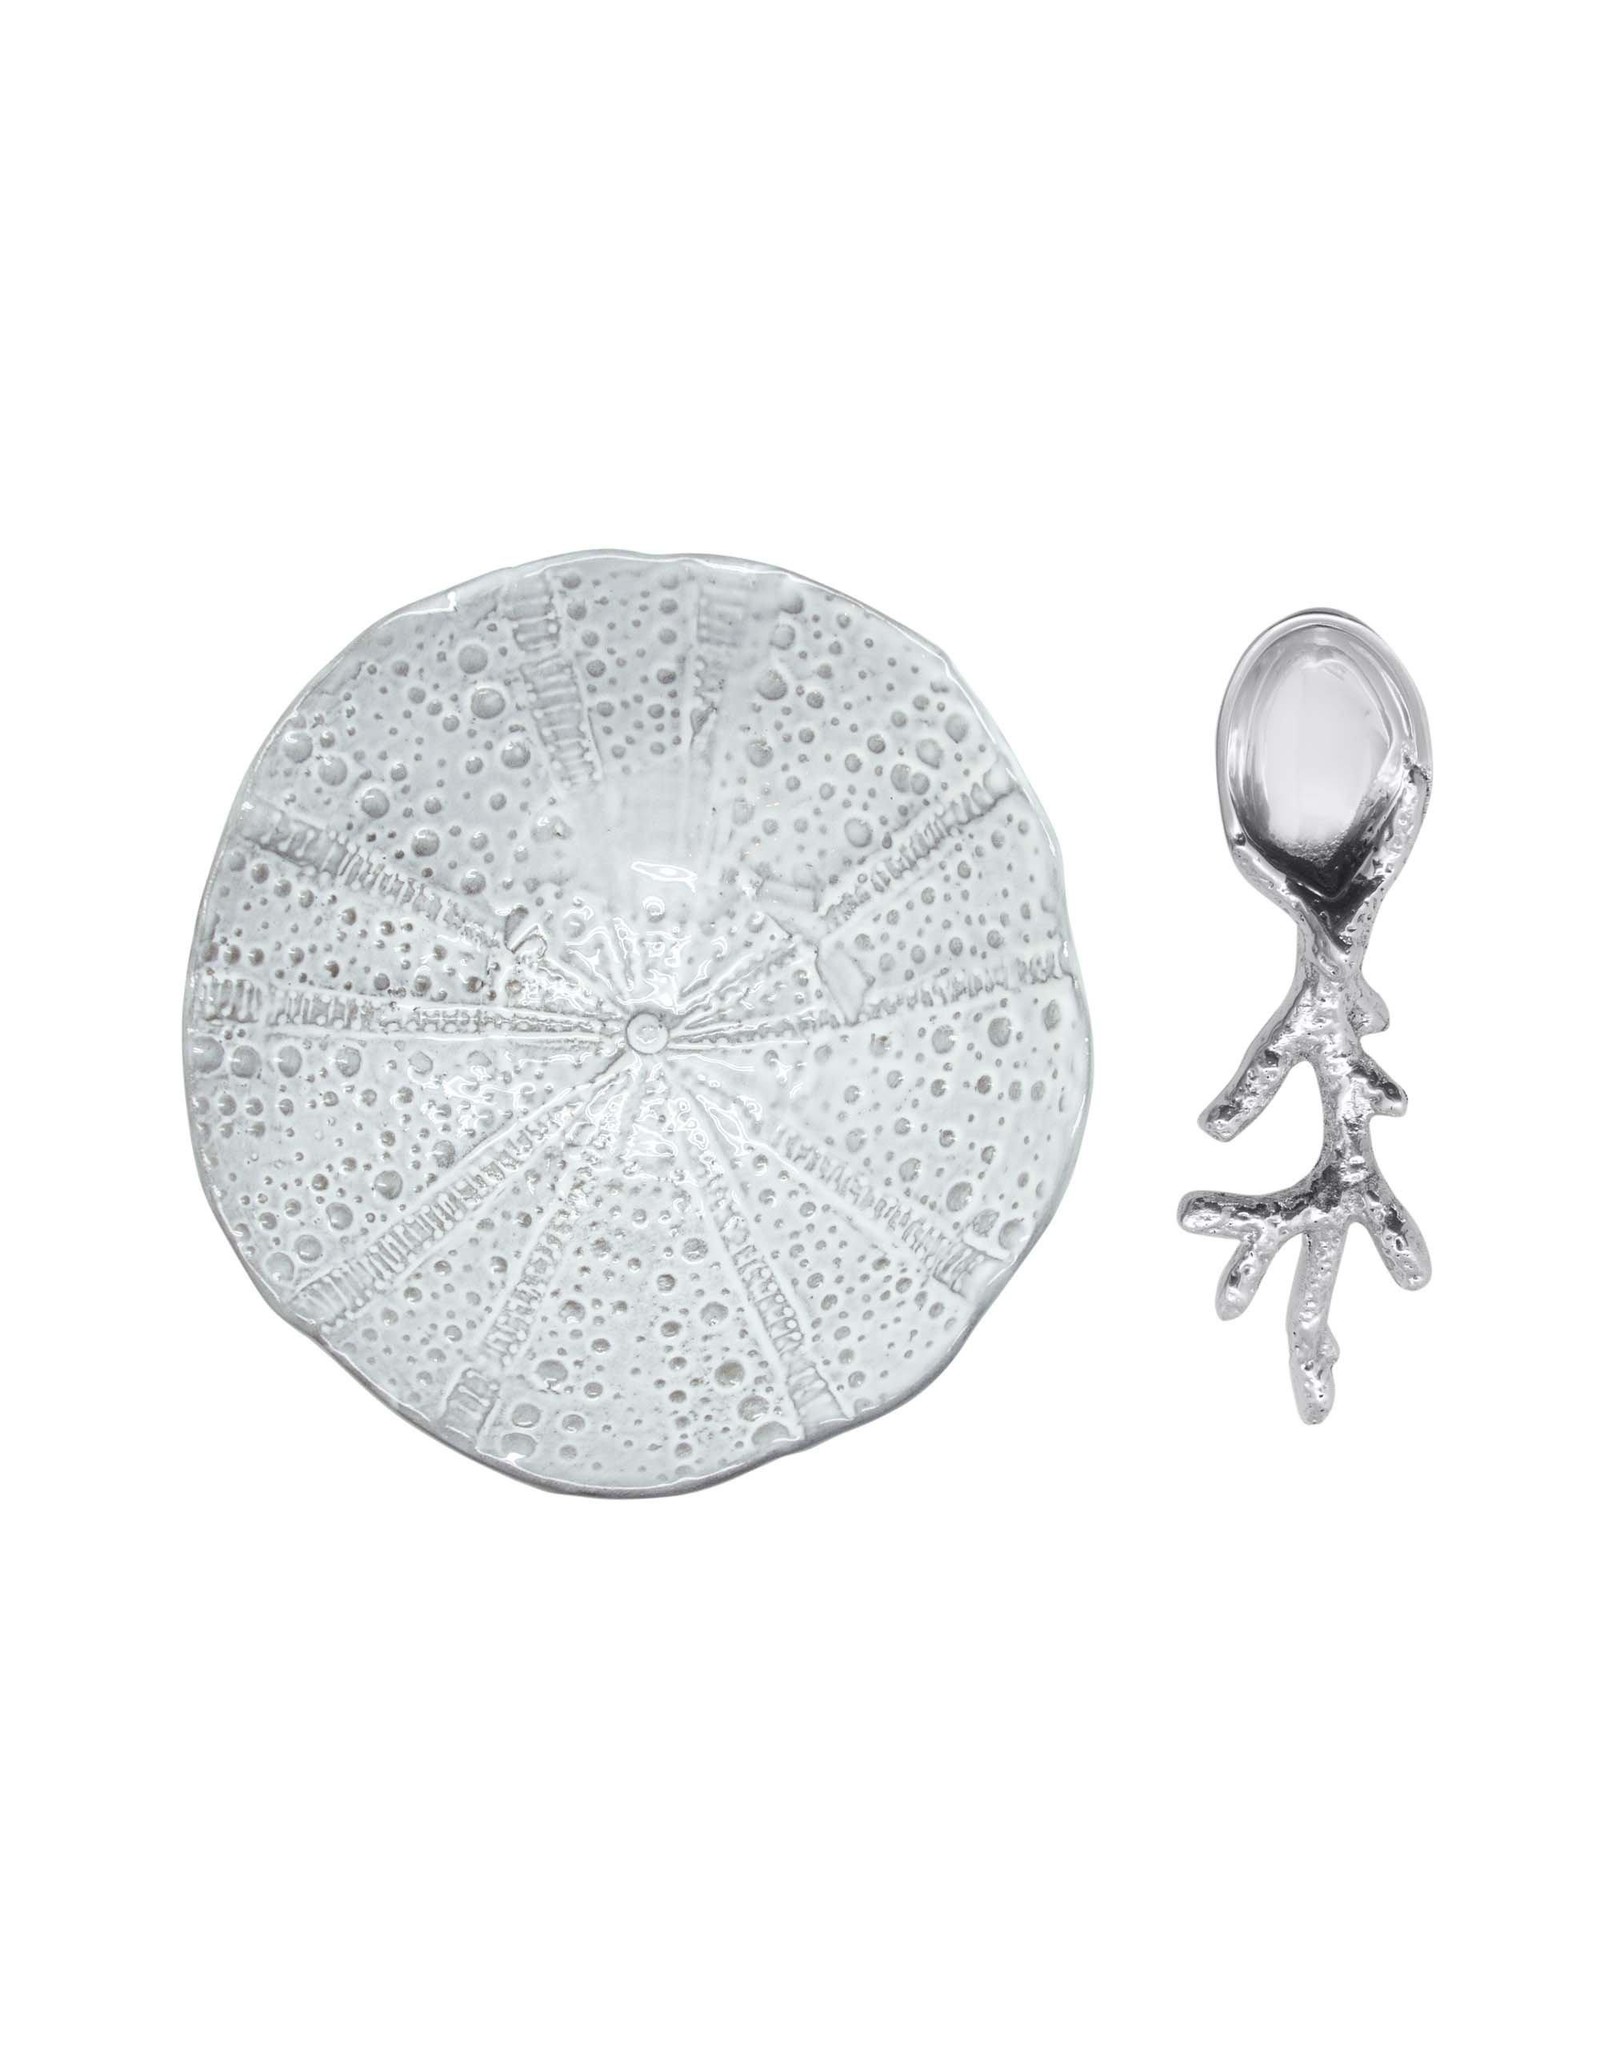 Mariposa Canape Plate w/Spoon